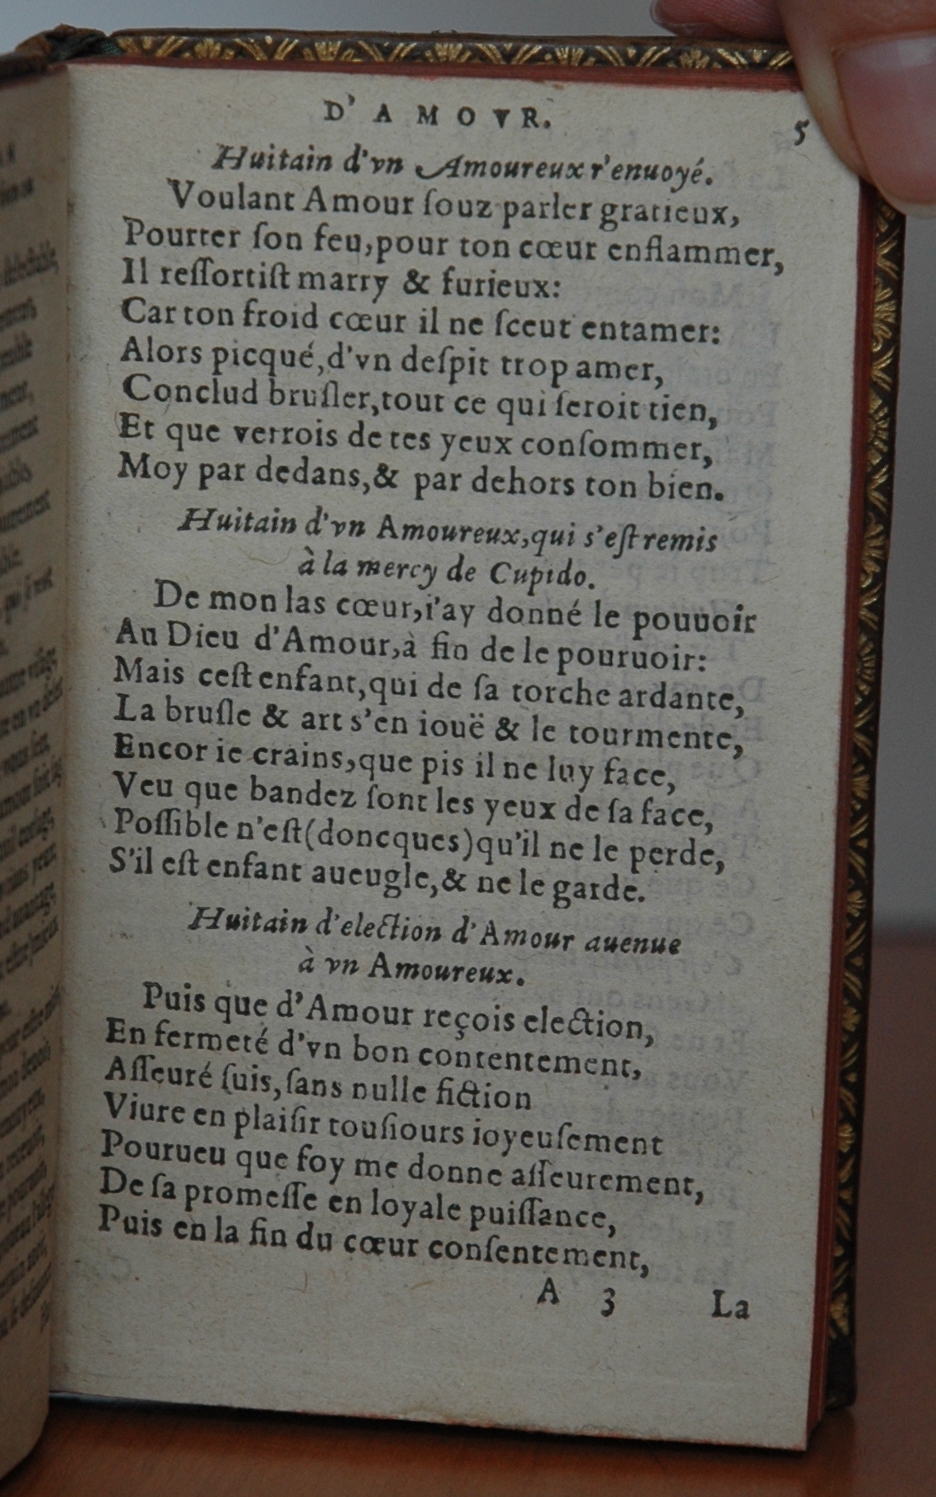 http://eman-archives.org/import/TJI/1582/[1582_Courtizanamoureux_Rigaud]_Page_005.jpg